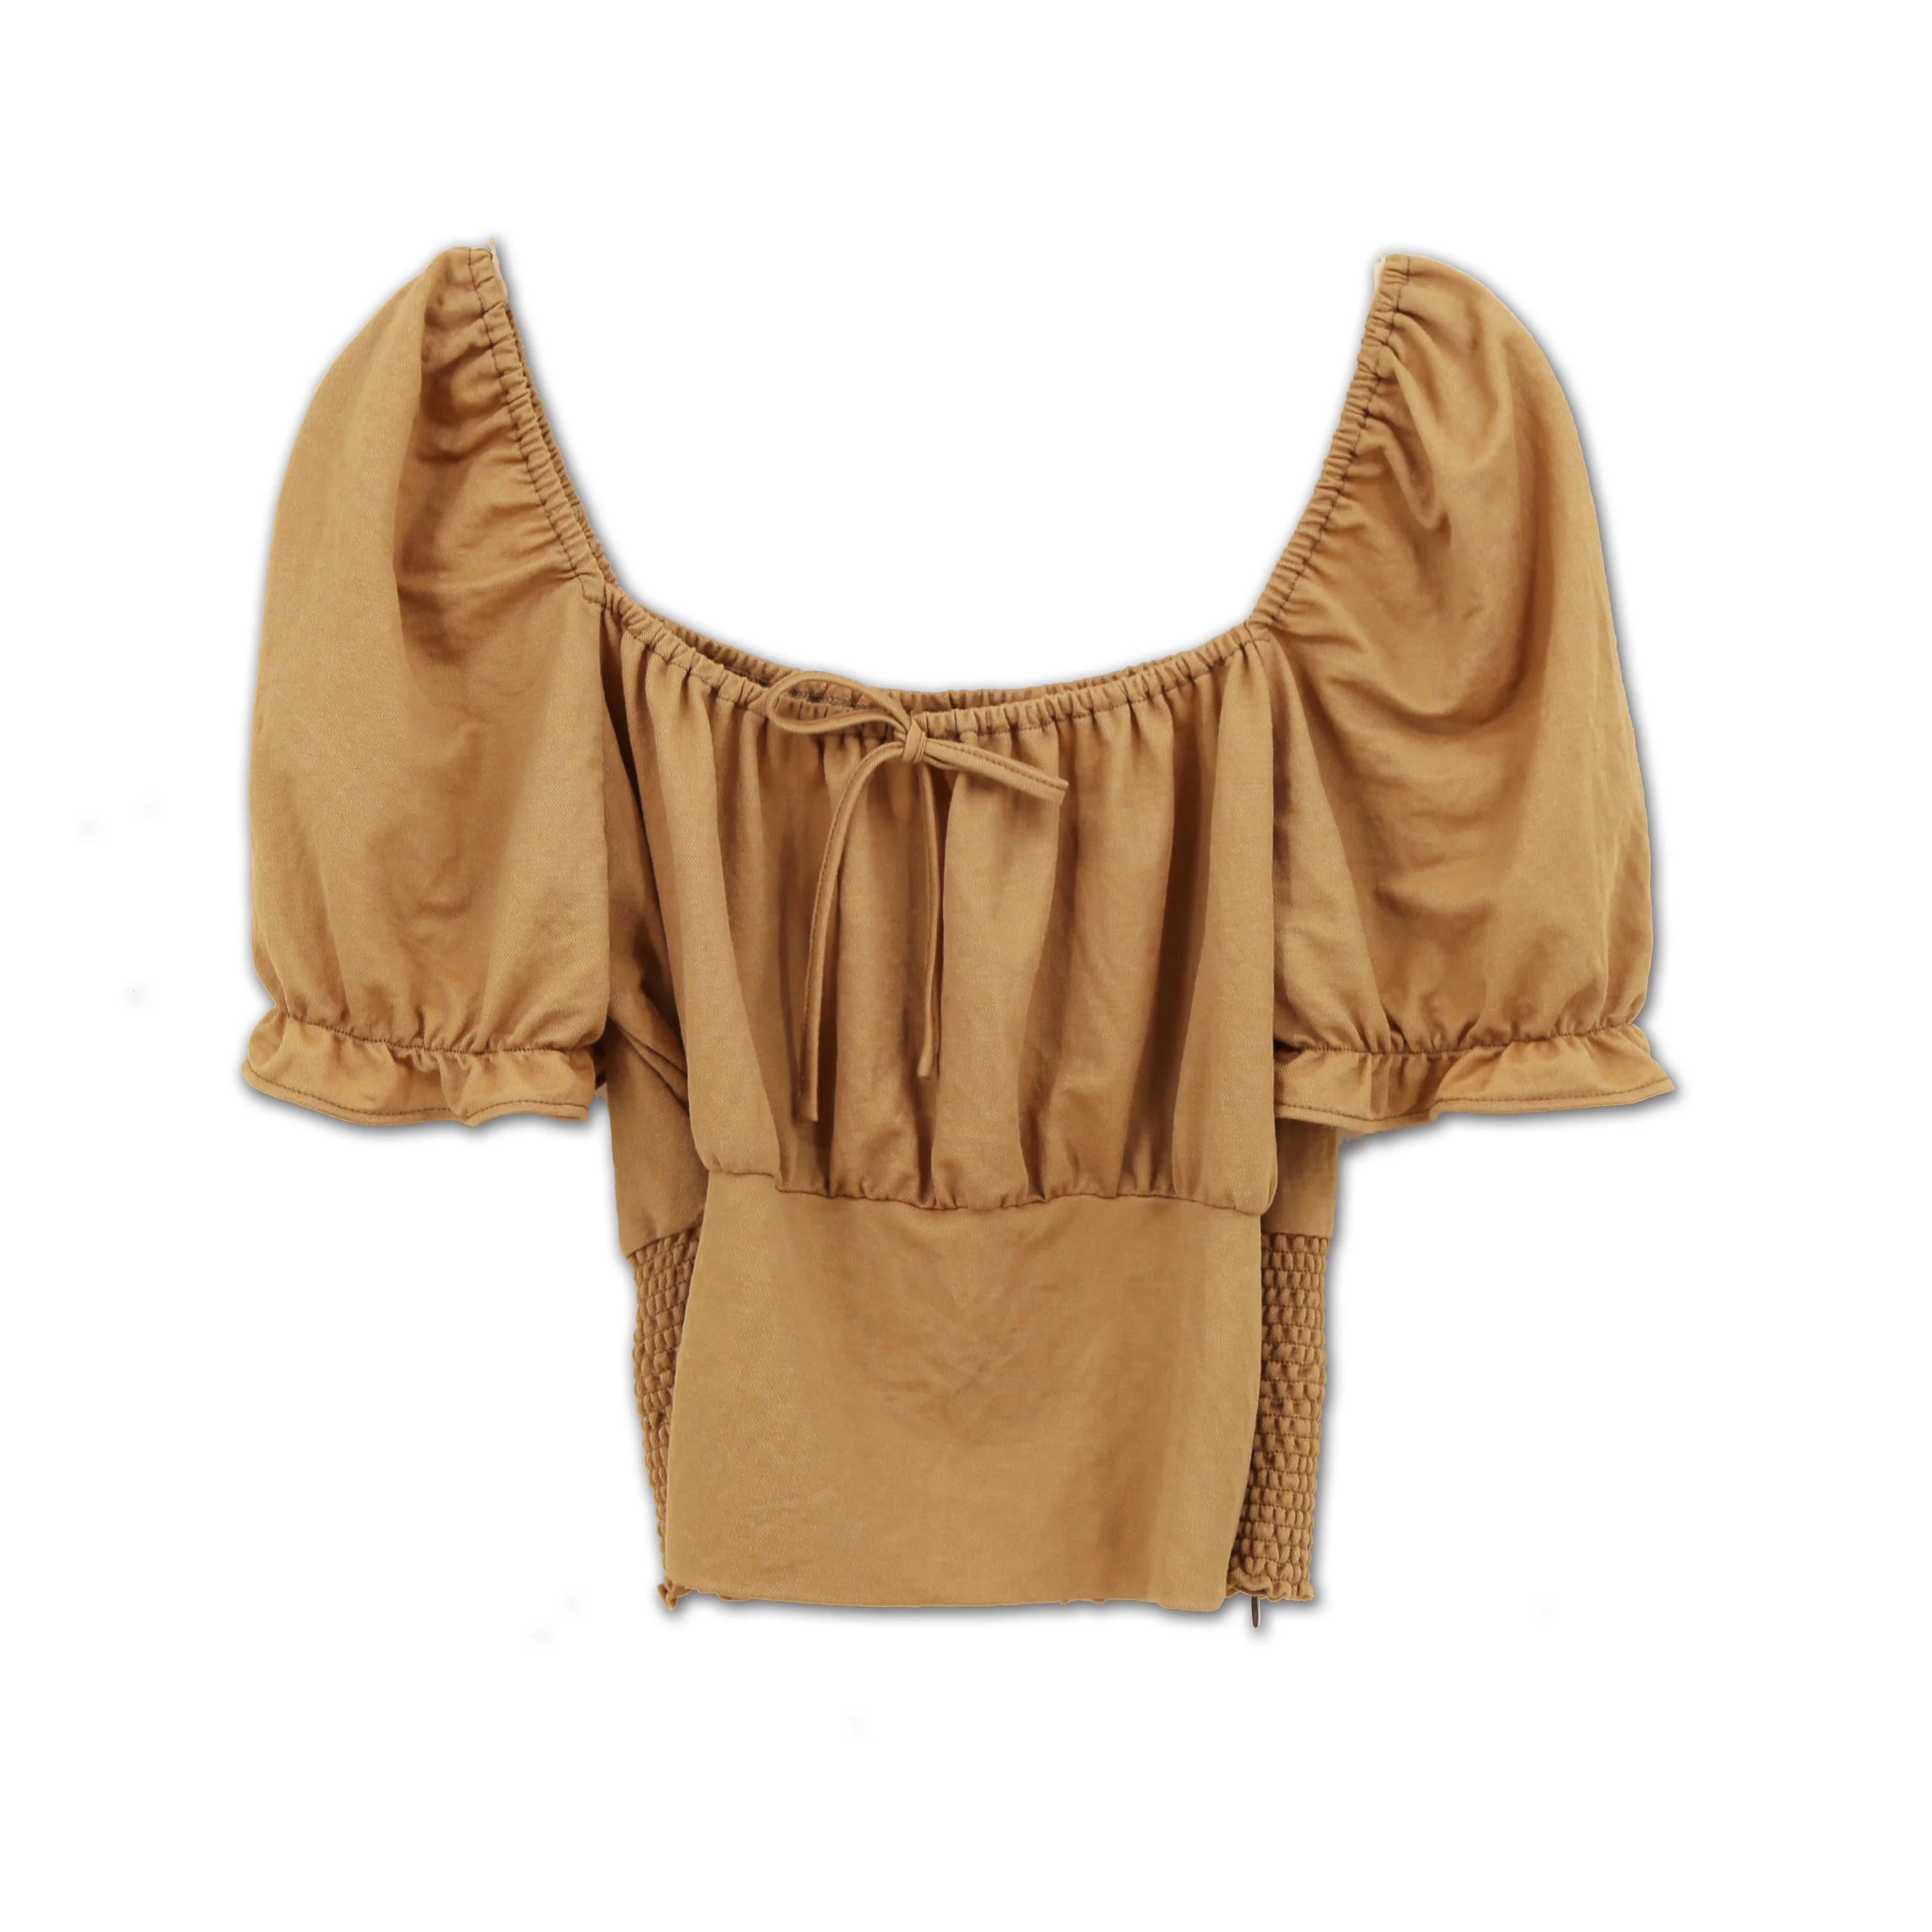 WOMEN CASUAL TOP WITH ELASTIC NECKLINE AND SMOCKING